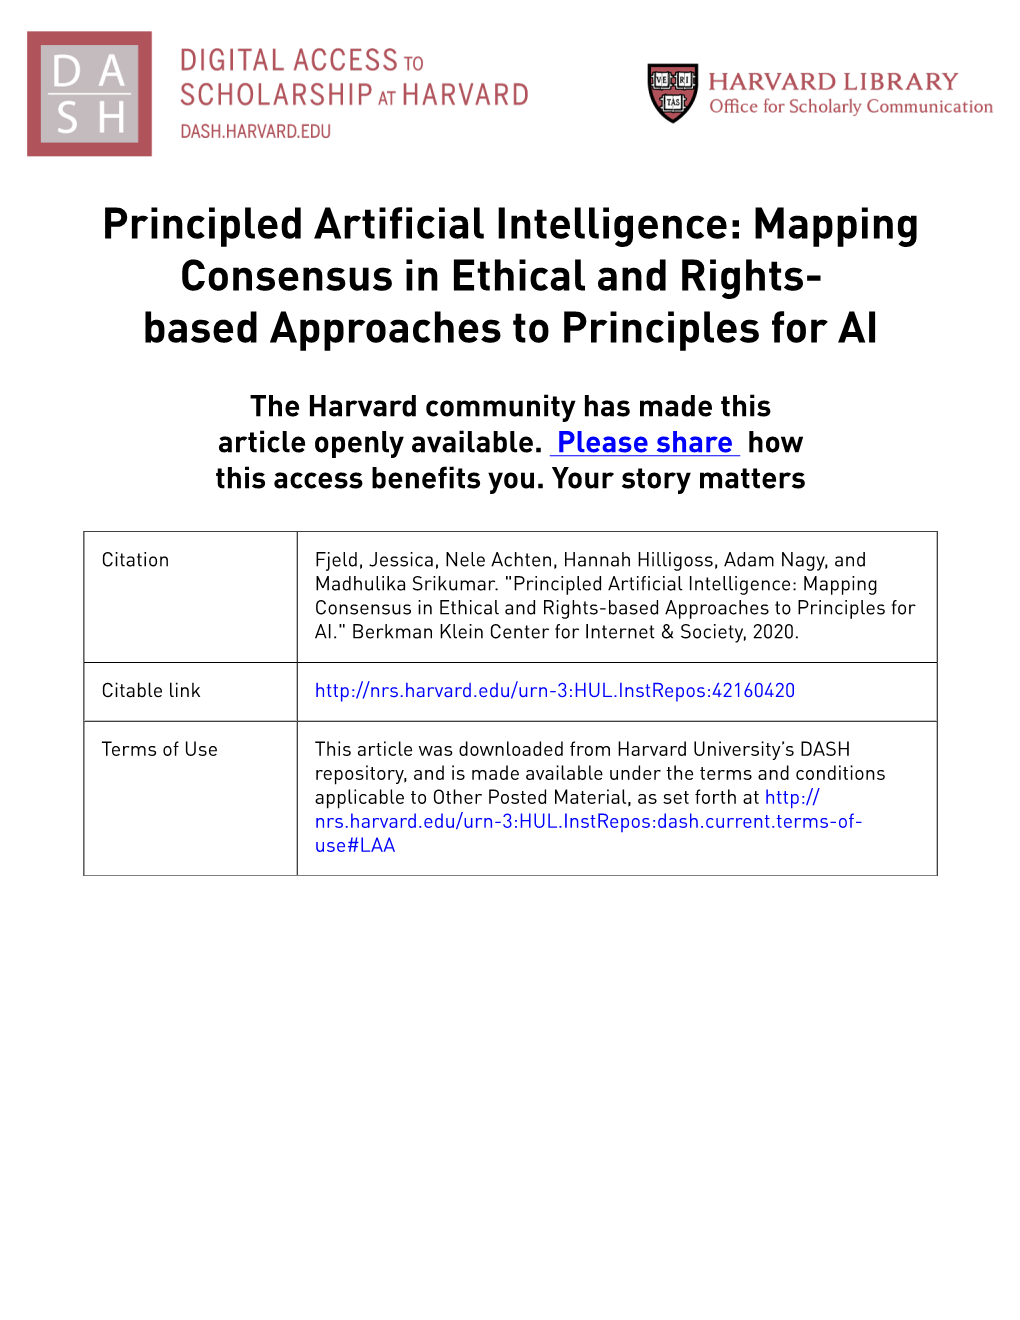 Principled Artificial Intelligence: Mapping Consensus in Ethical and Rights- Based Approaches to Principles for AI